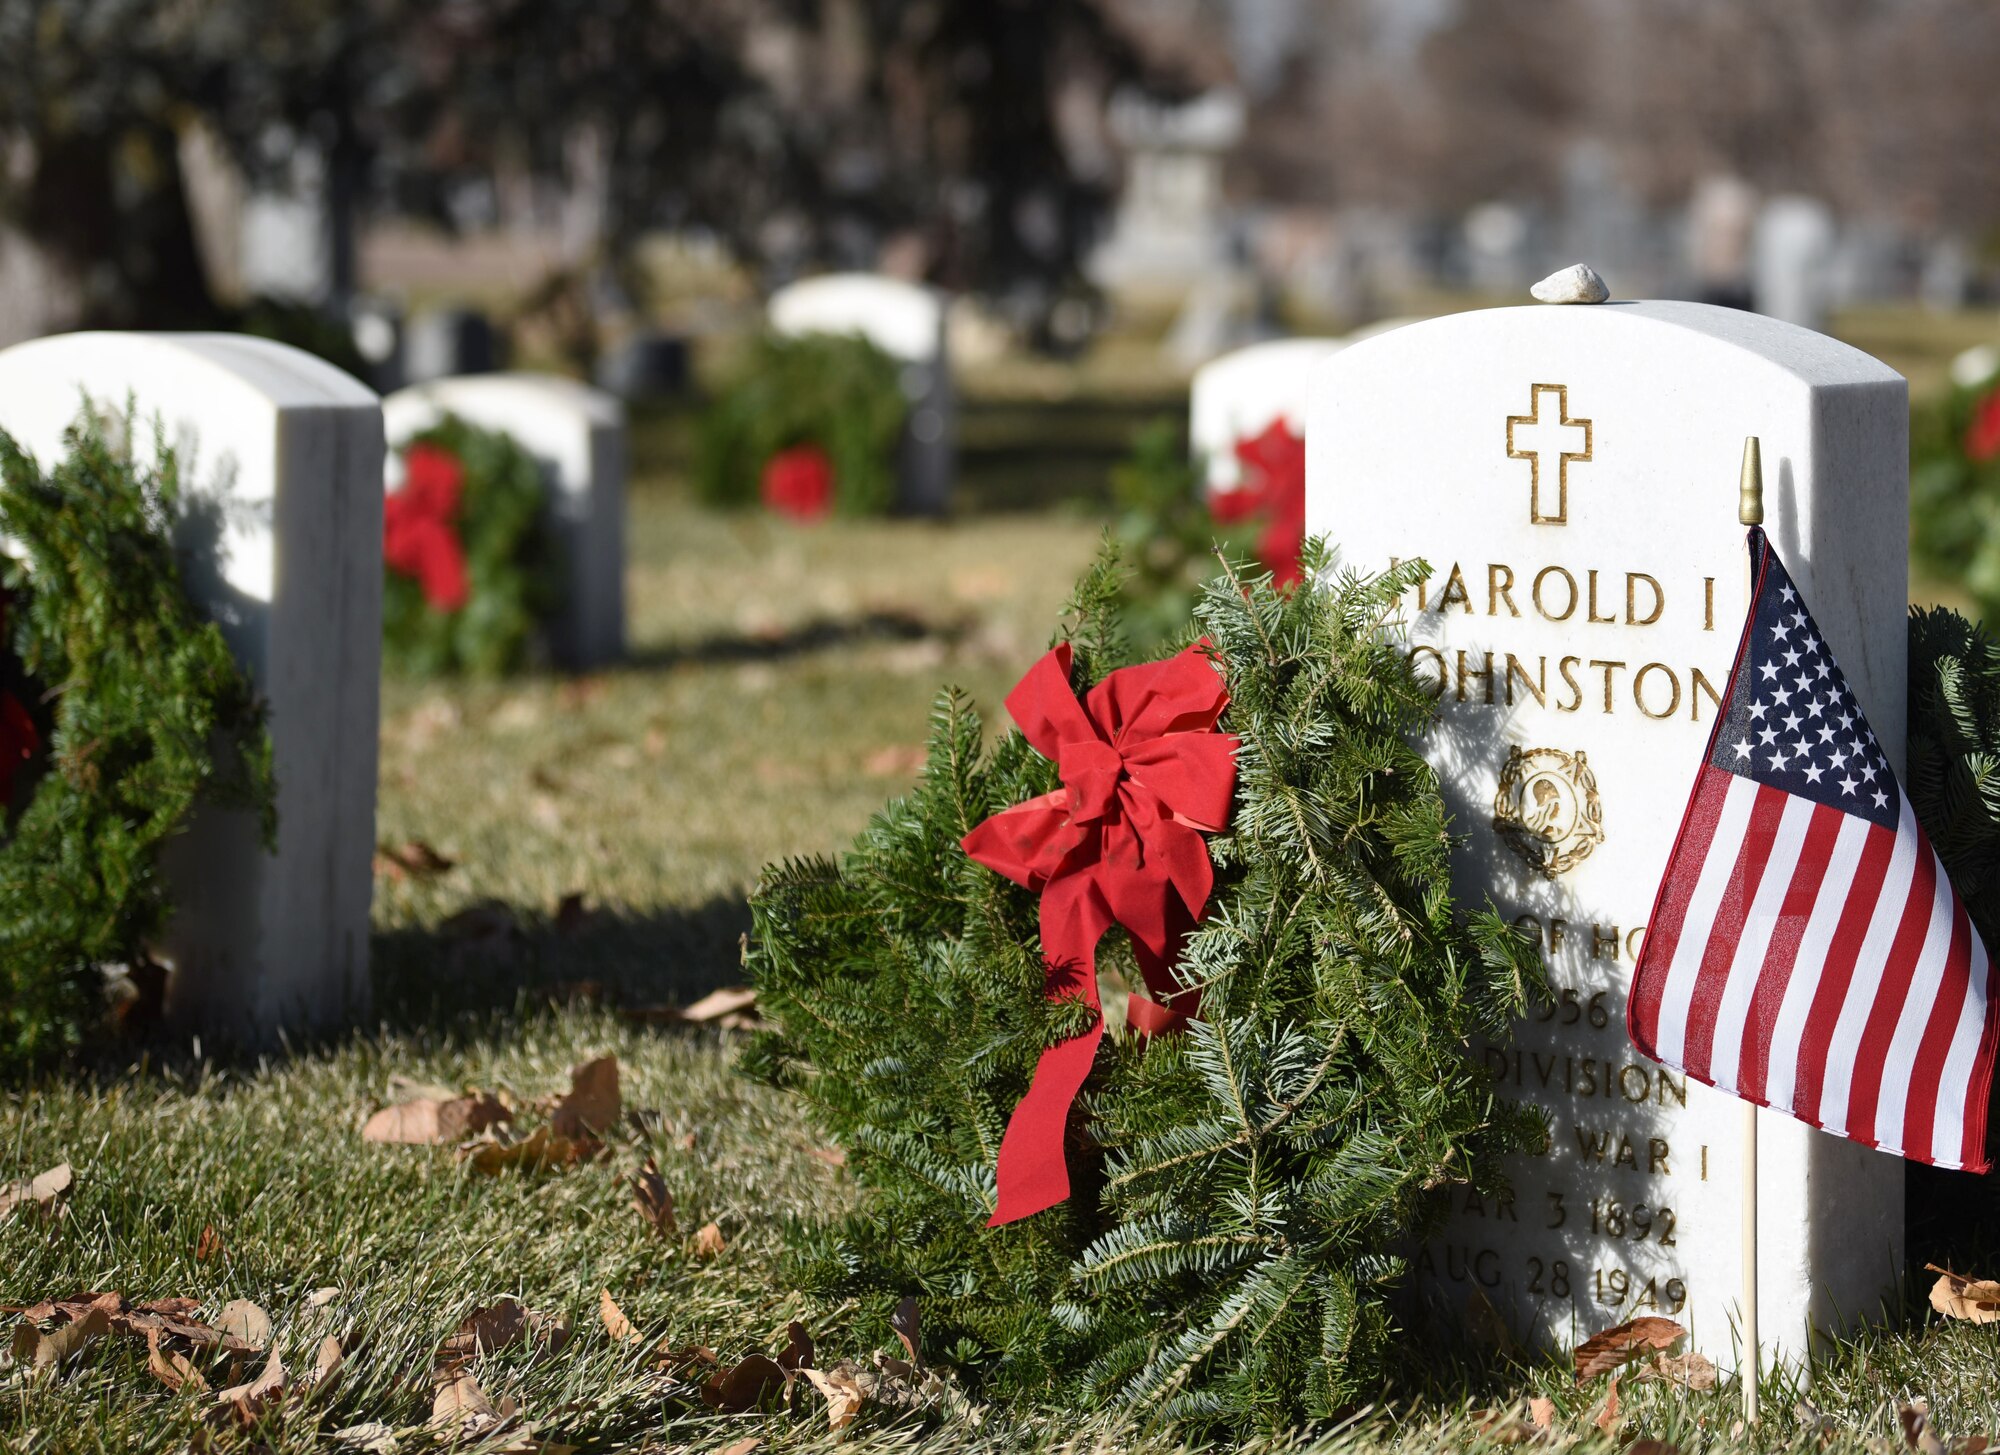 Volunteers placed wreaths on the graves of fallen service members at the Wreaths Across America event at Fairmount Cemetery in Denver, Dec. 14, 2019.